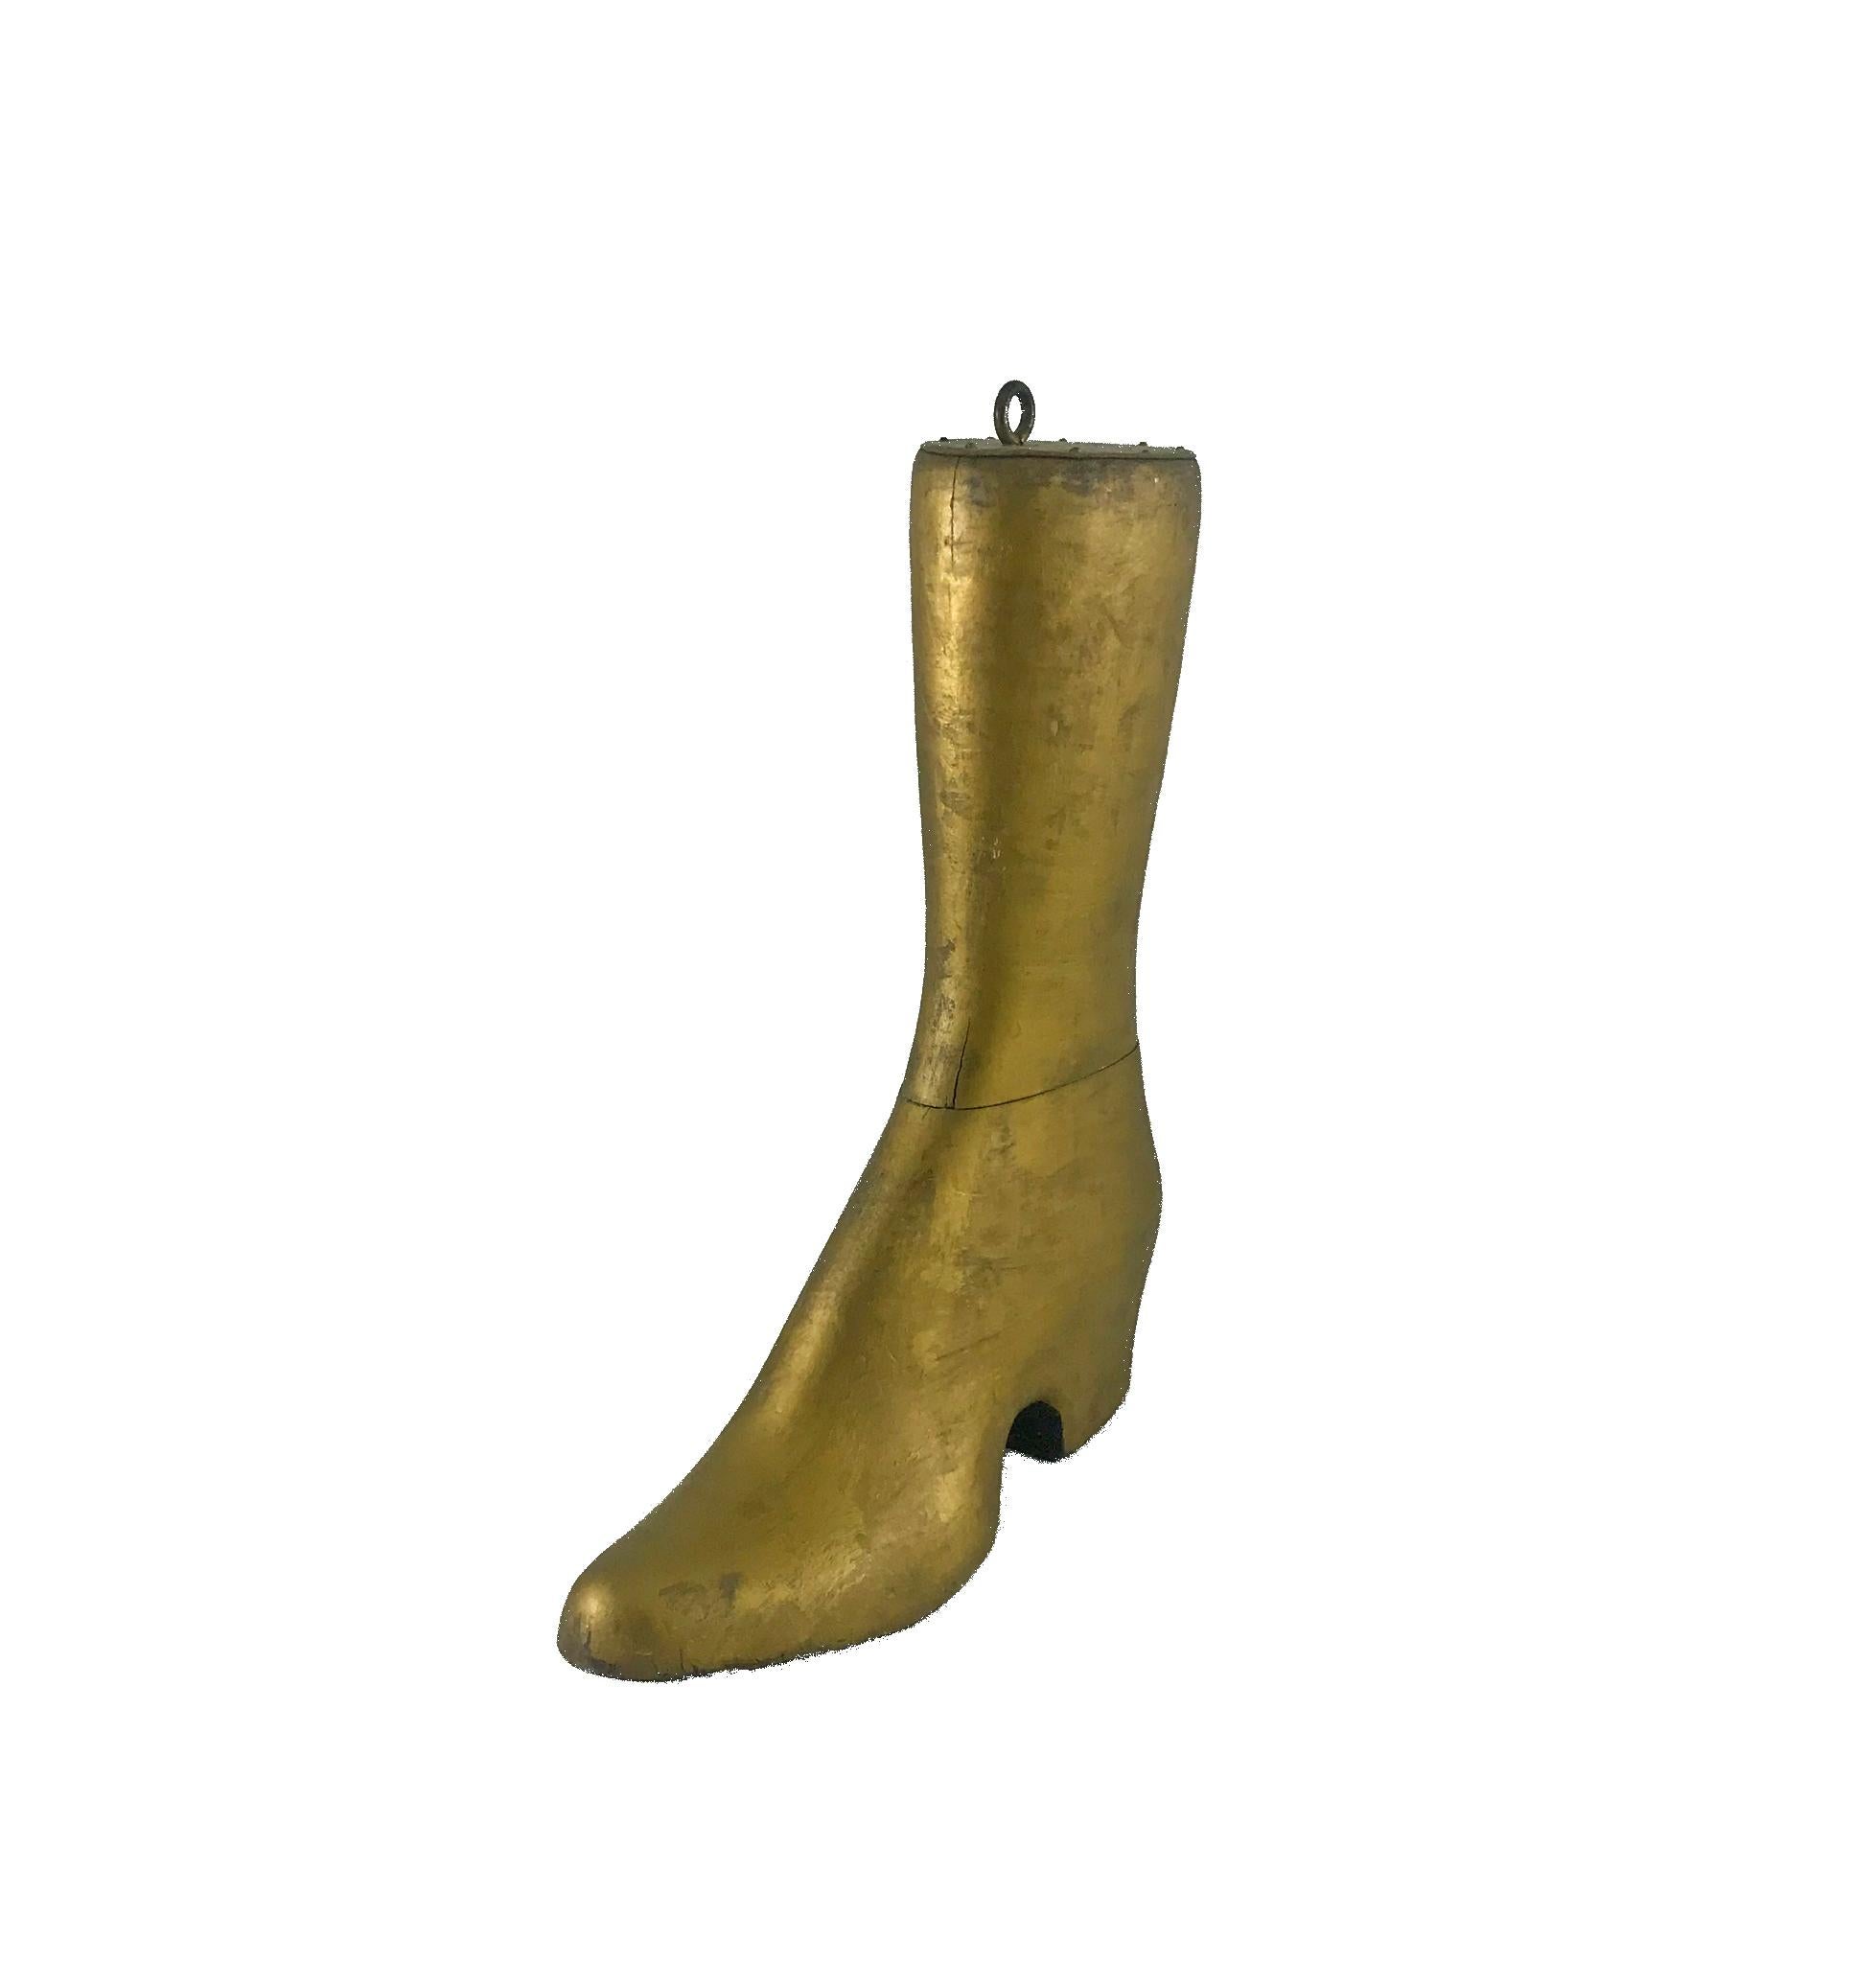 A carved cobbler's boot-form trade sign, in old gold paint.
Carved in two pieces of pine, capped with lead,
circa 1870
Very good condition, measures: 14